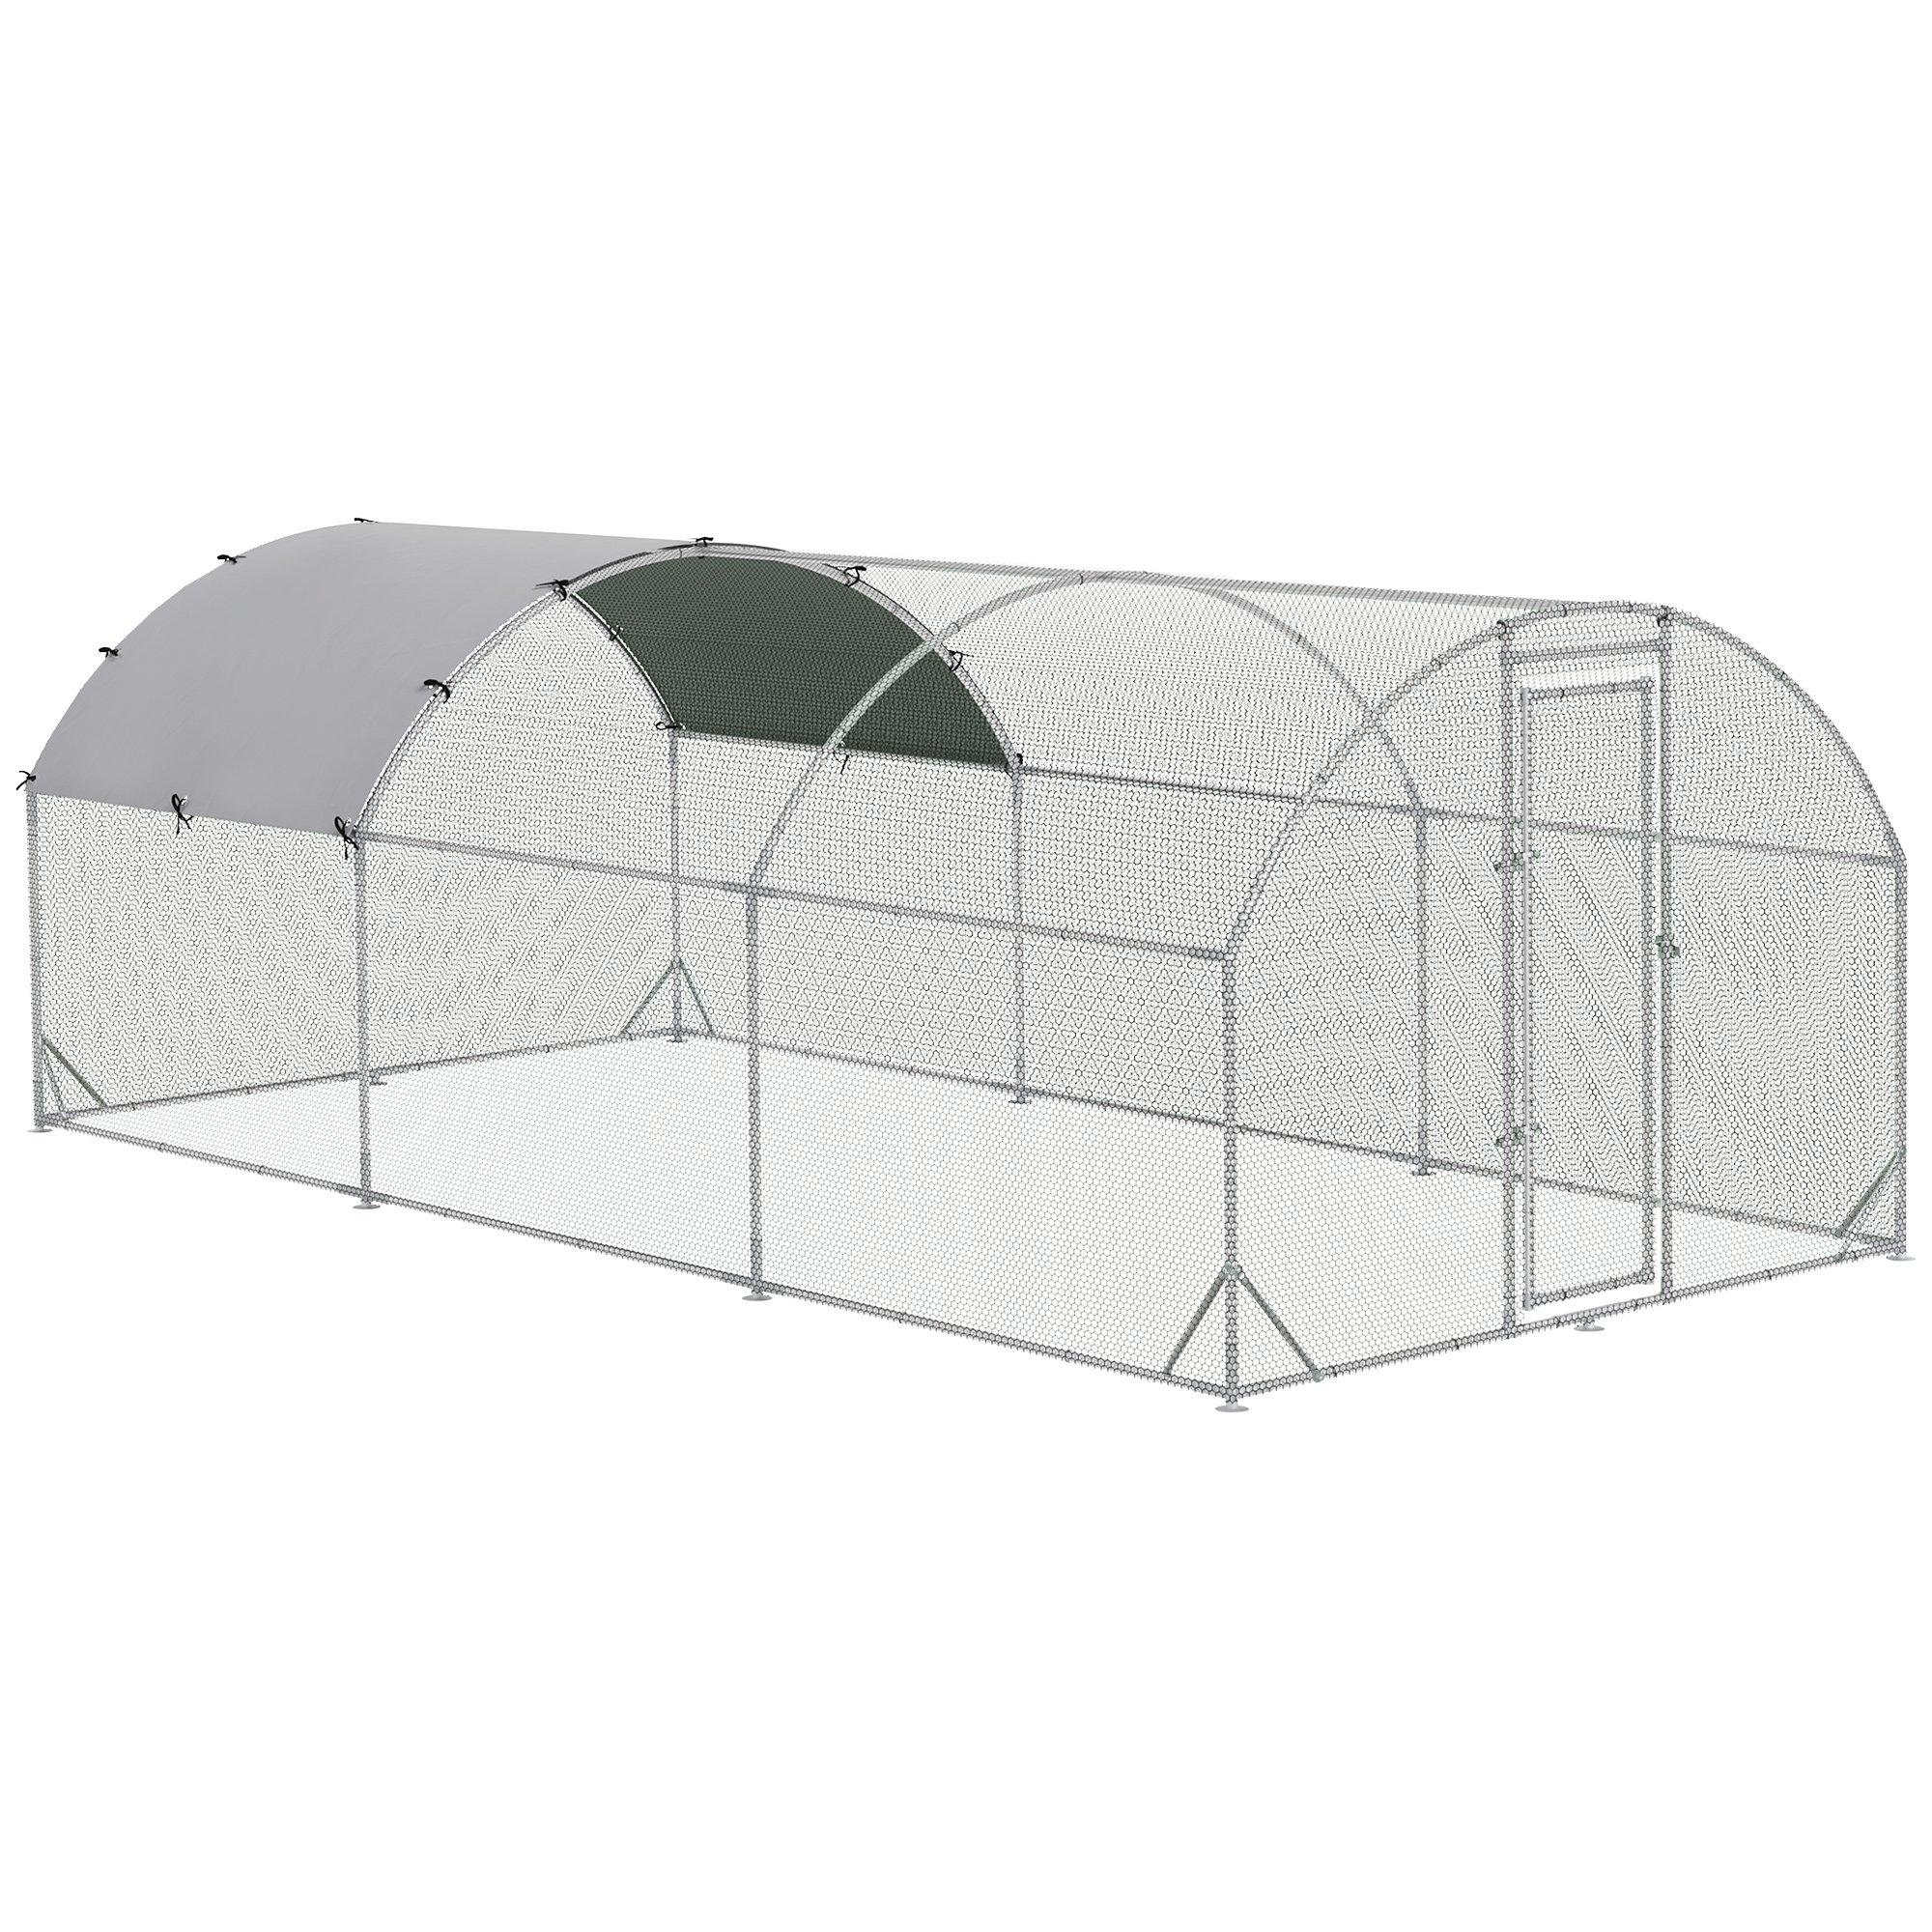 Chicken Run 1 Room Galvanised Chicken Coop Hen House with Cover 5.7 x 2.8 x 2m